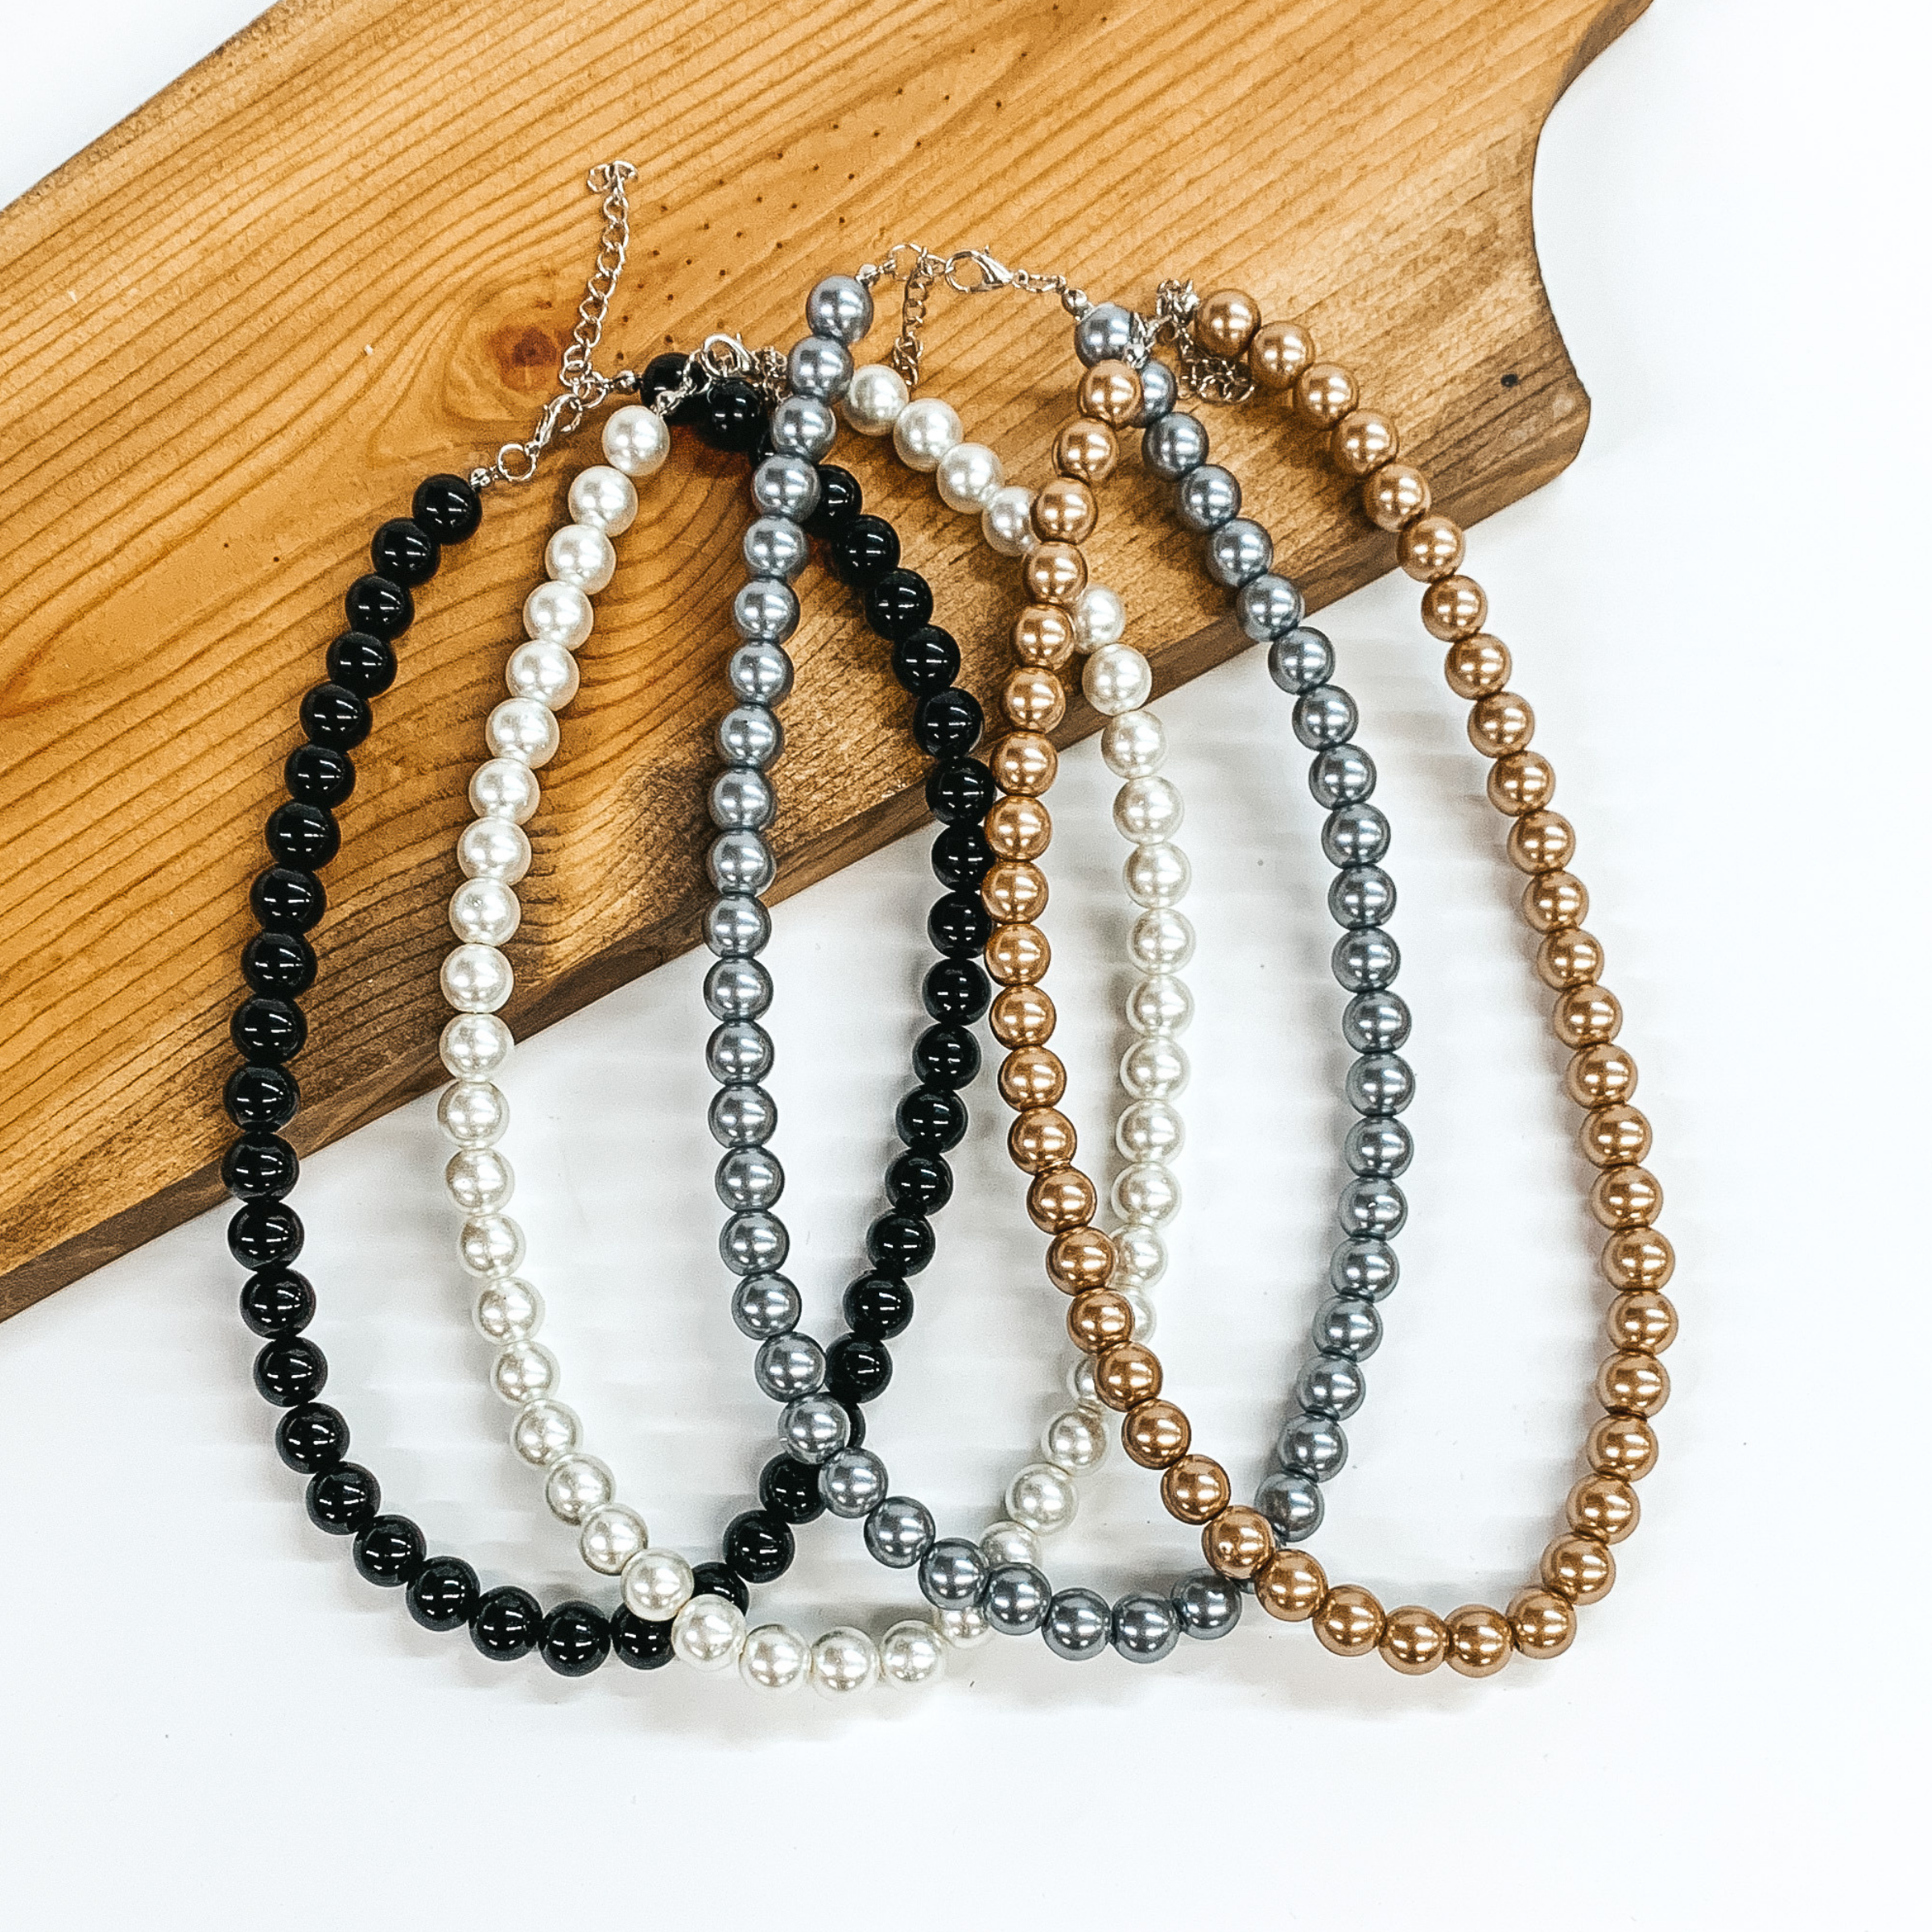 Pictured are four pearl beaded necklaces partially laying on a wood block on a white background. These necklaces are in the colors black, ivory, grey, and bronze.